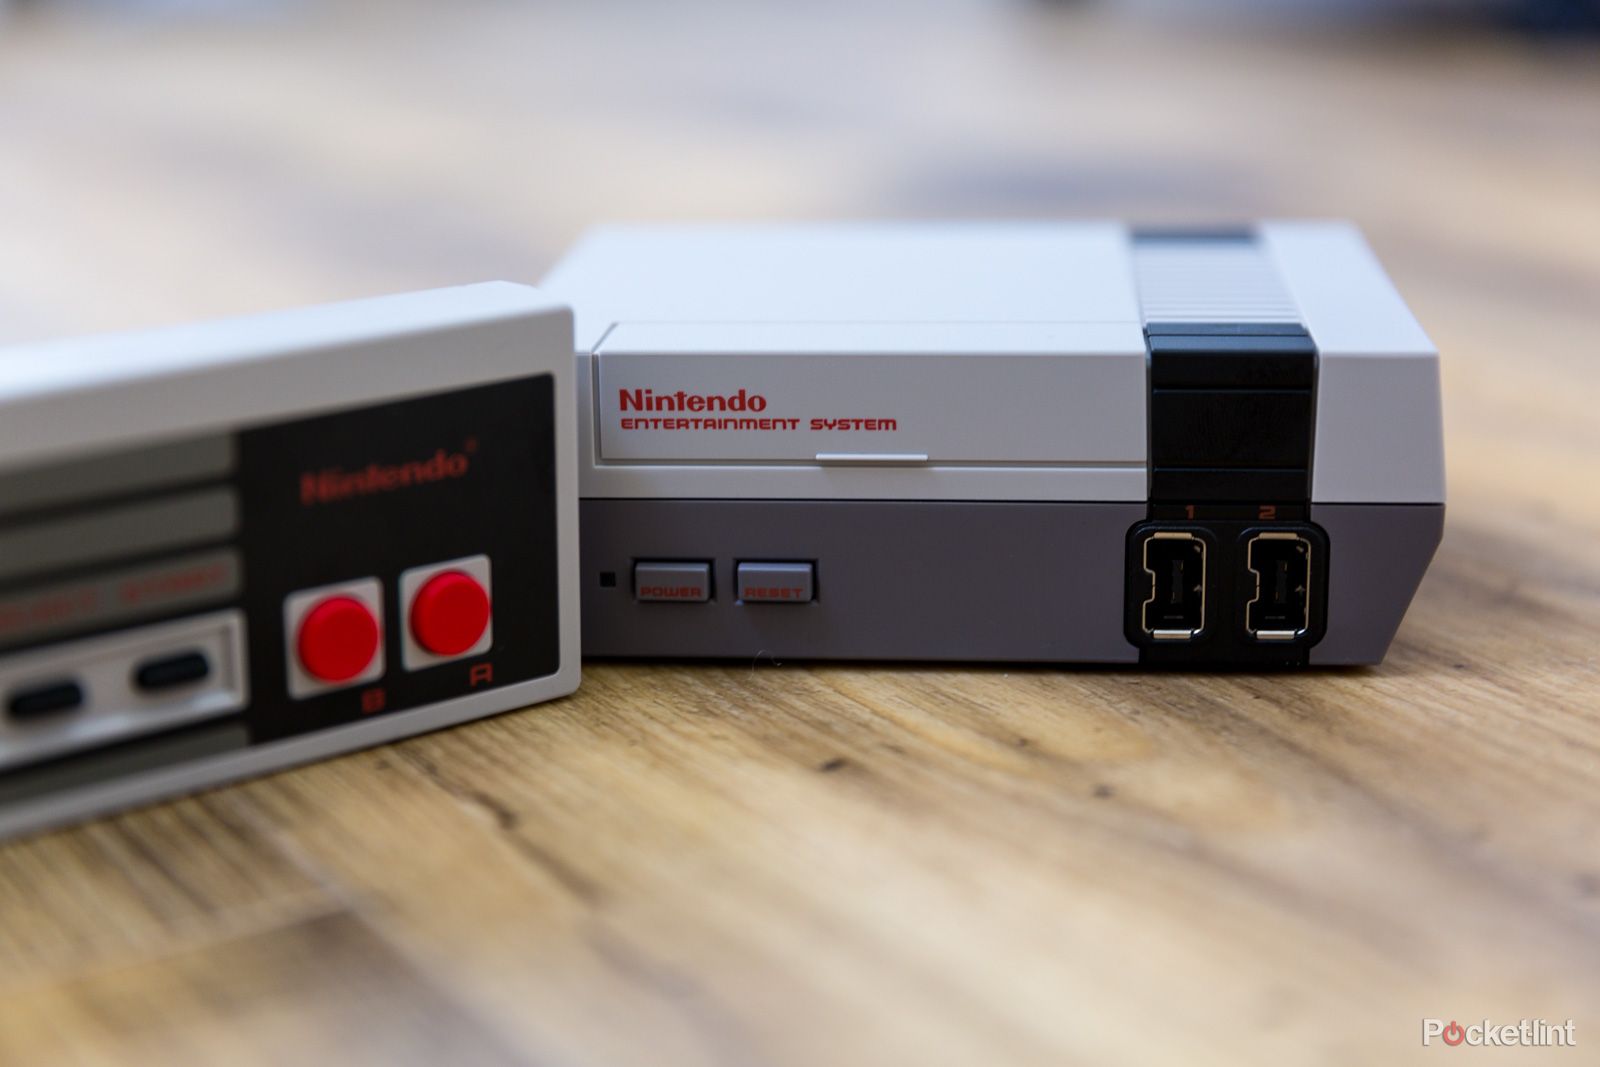 The Best Retro Games Consoles For 2020 Go Back To The Future image 4